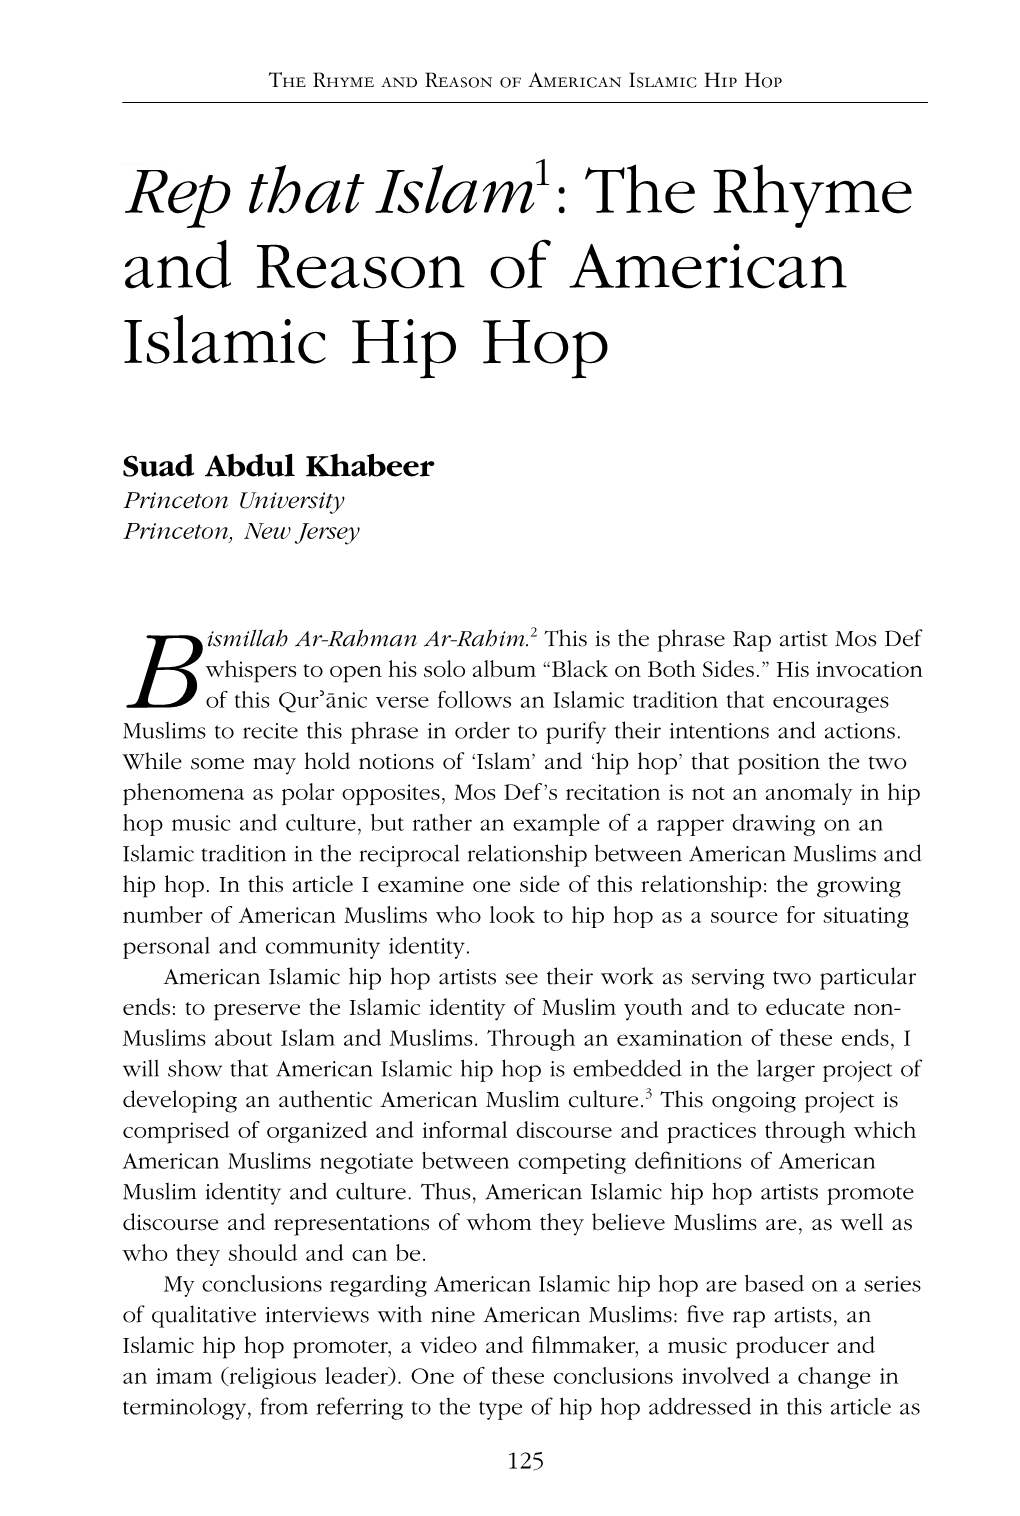 Rep That Islam1: the Rhyme and Reason of American Islamic Hip